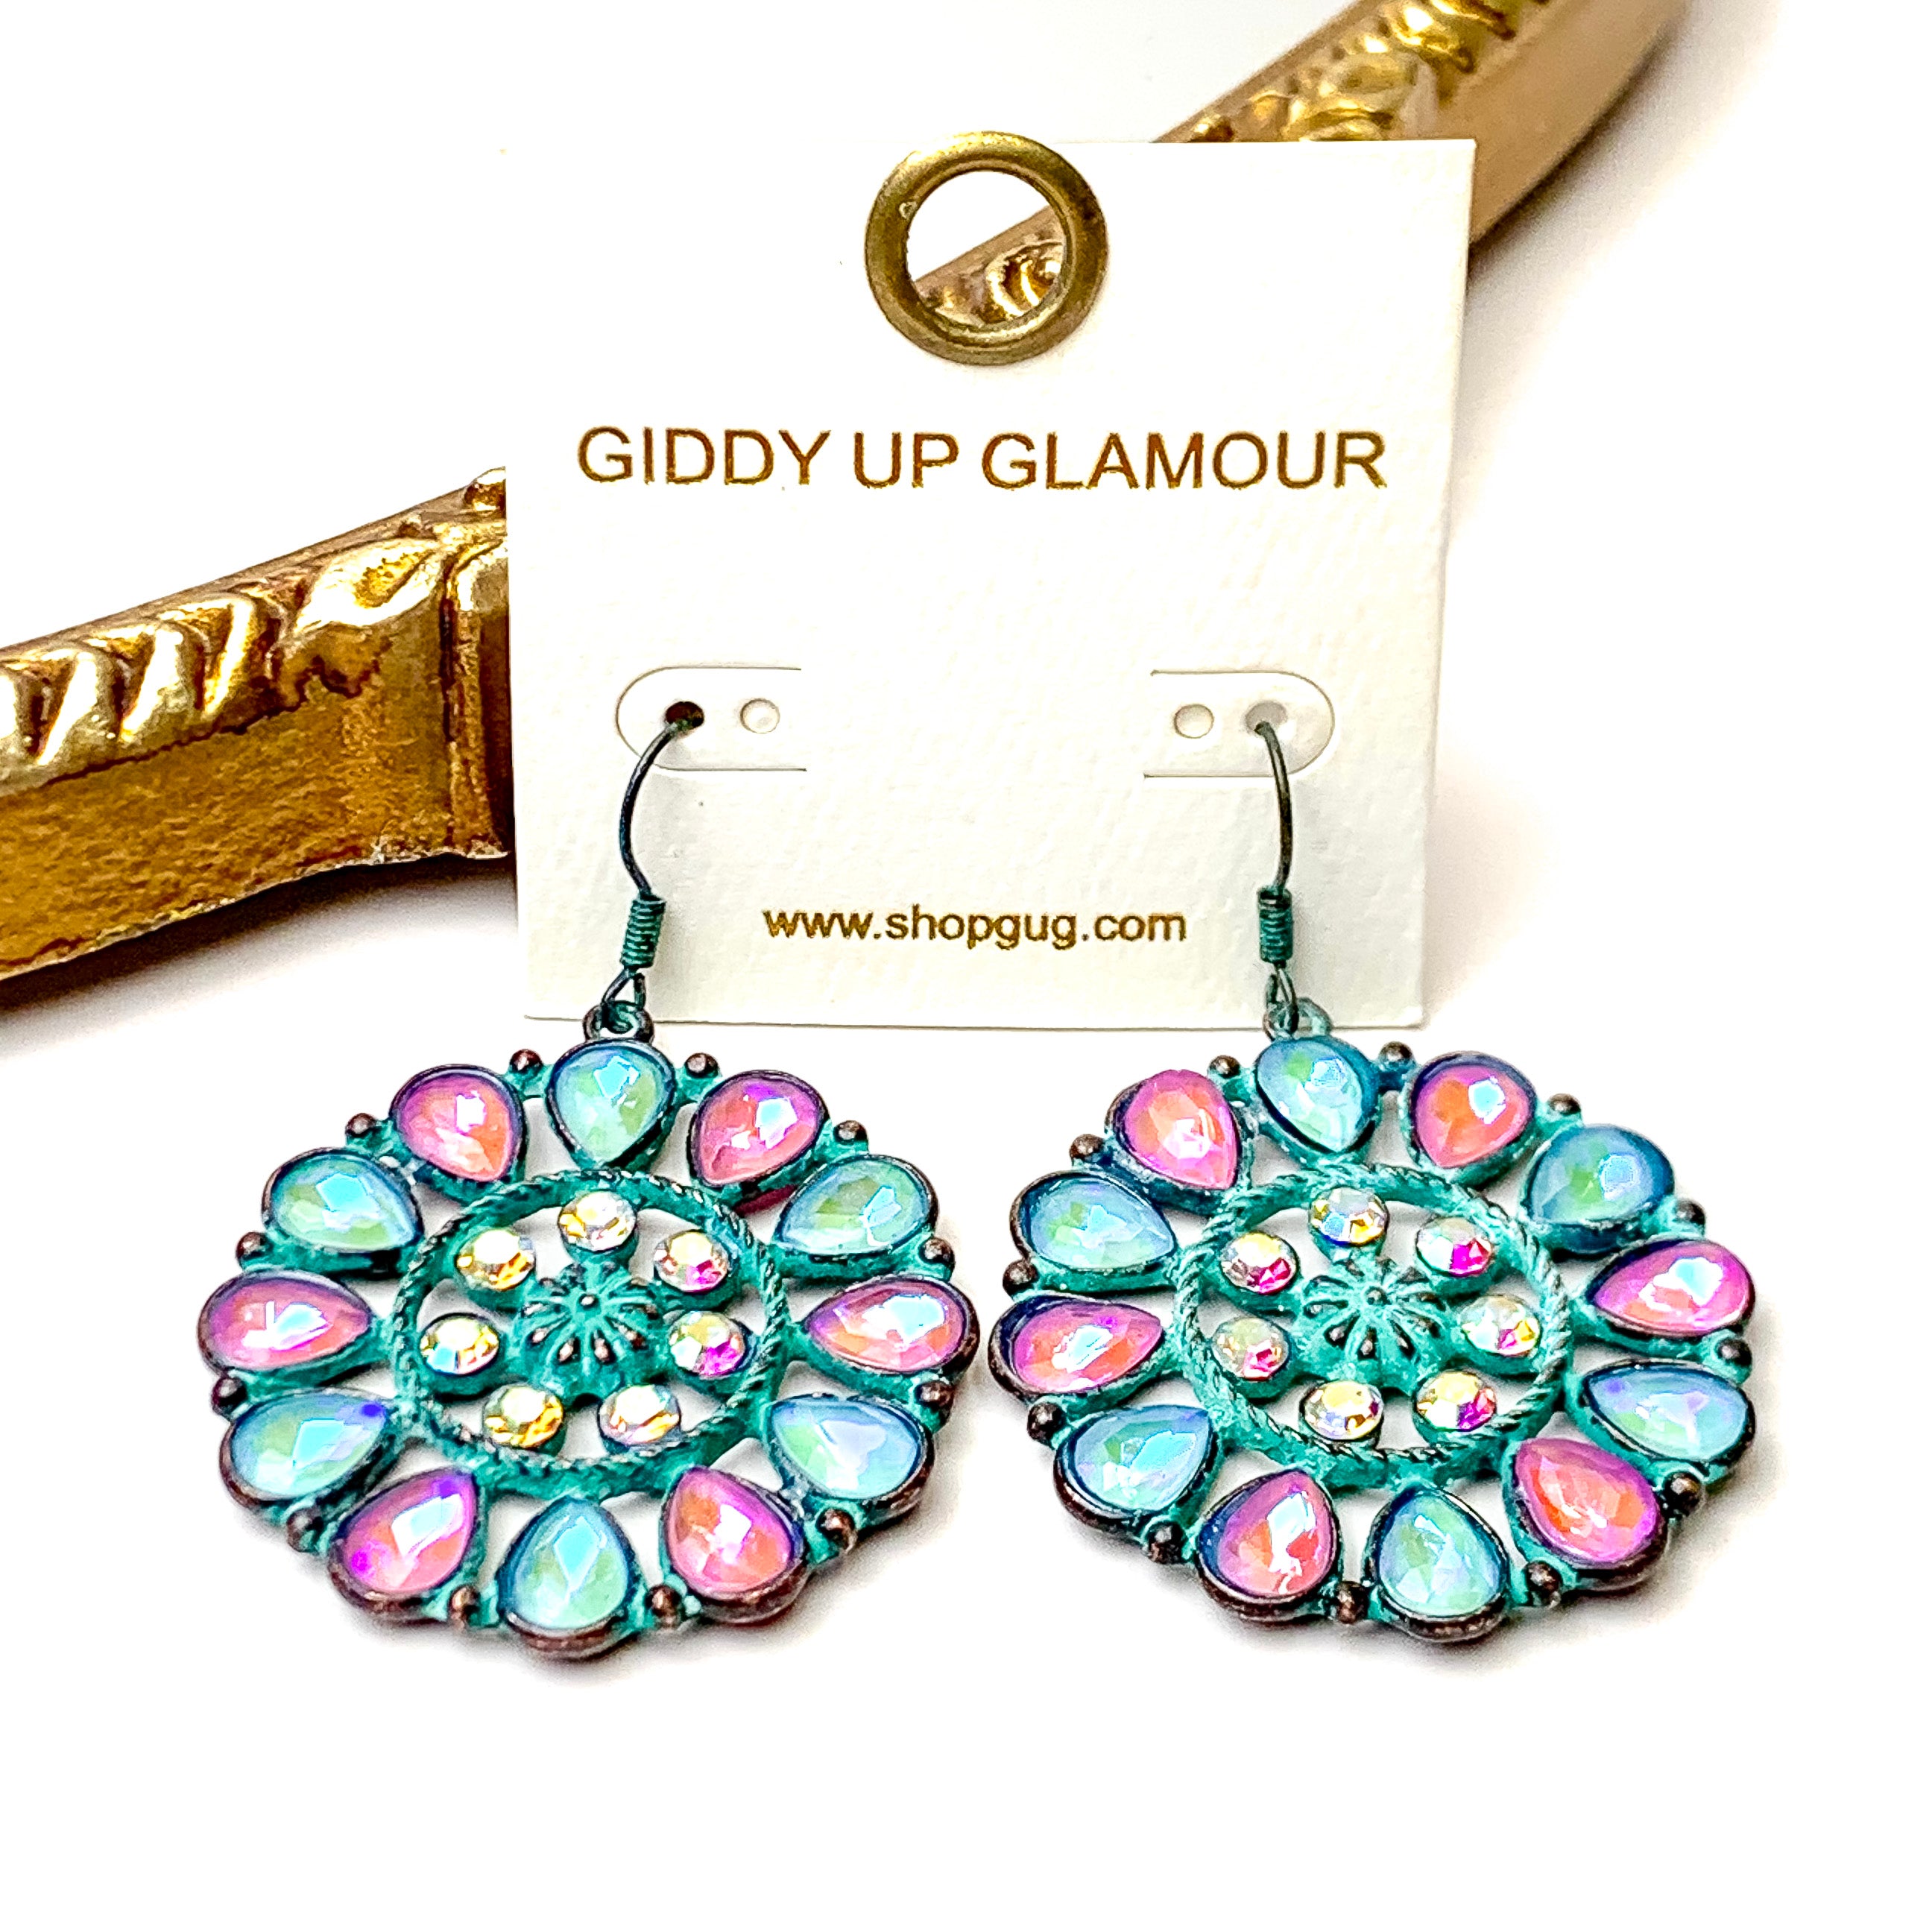 Desert Daisy Patina Tone Flower Concho Drop Earrings in Pink and Turquoise - Giddy Up Glamour Boutique